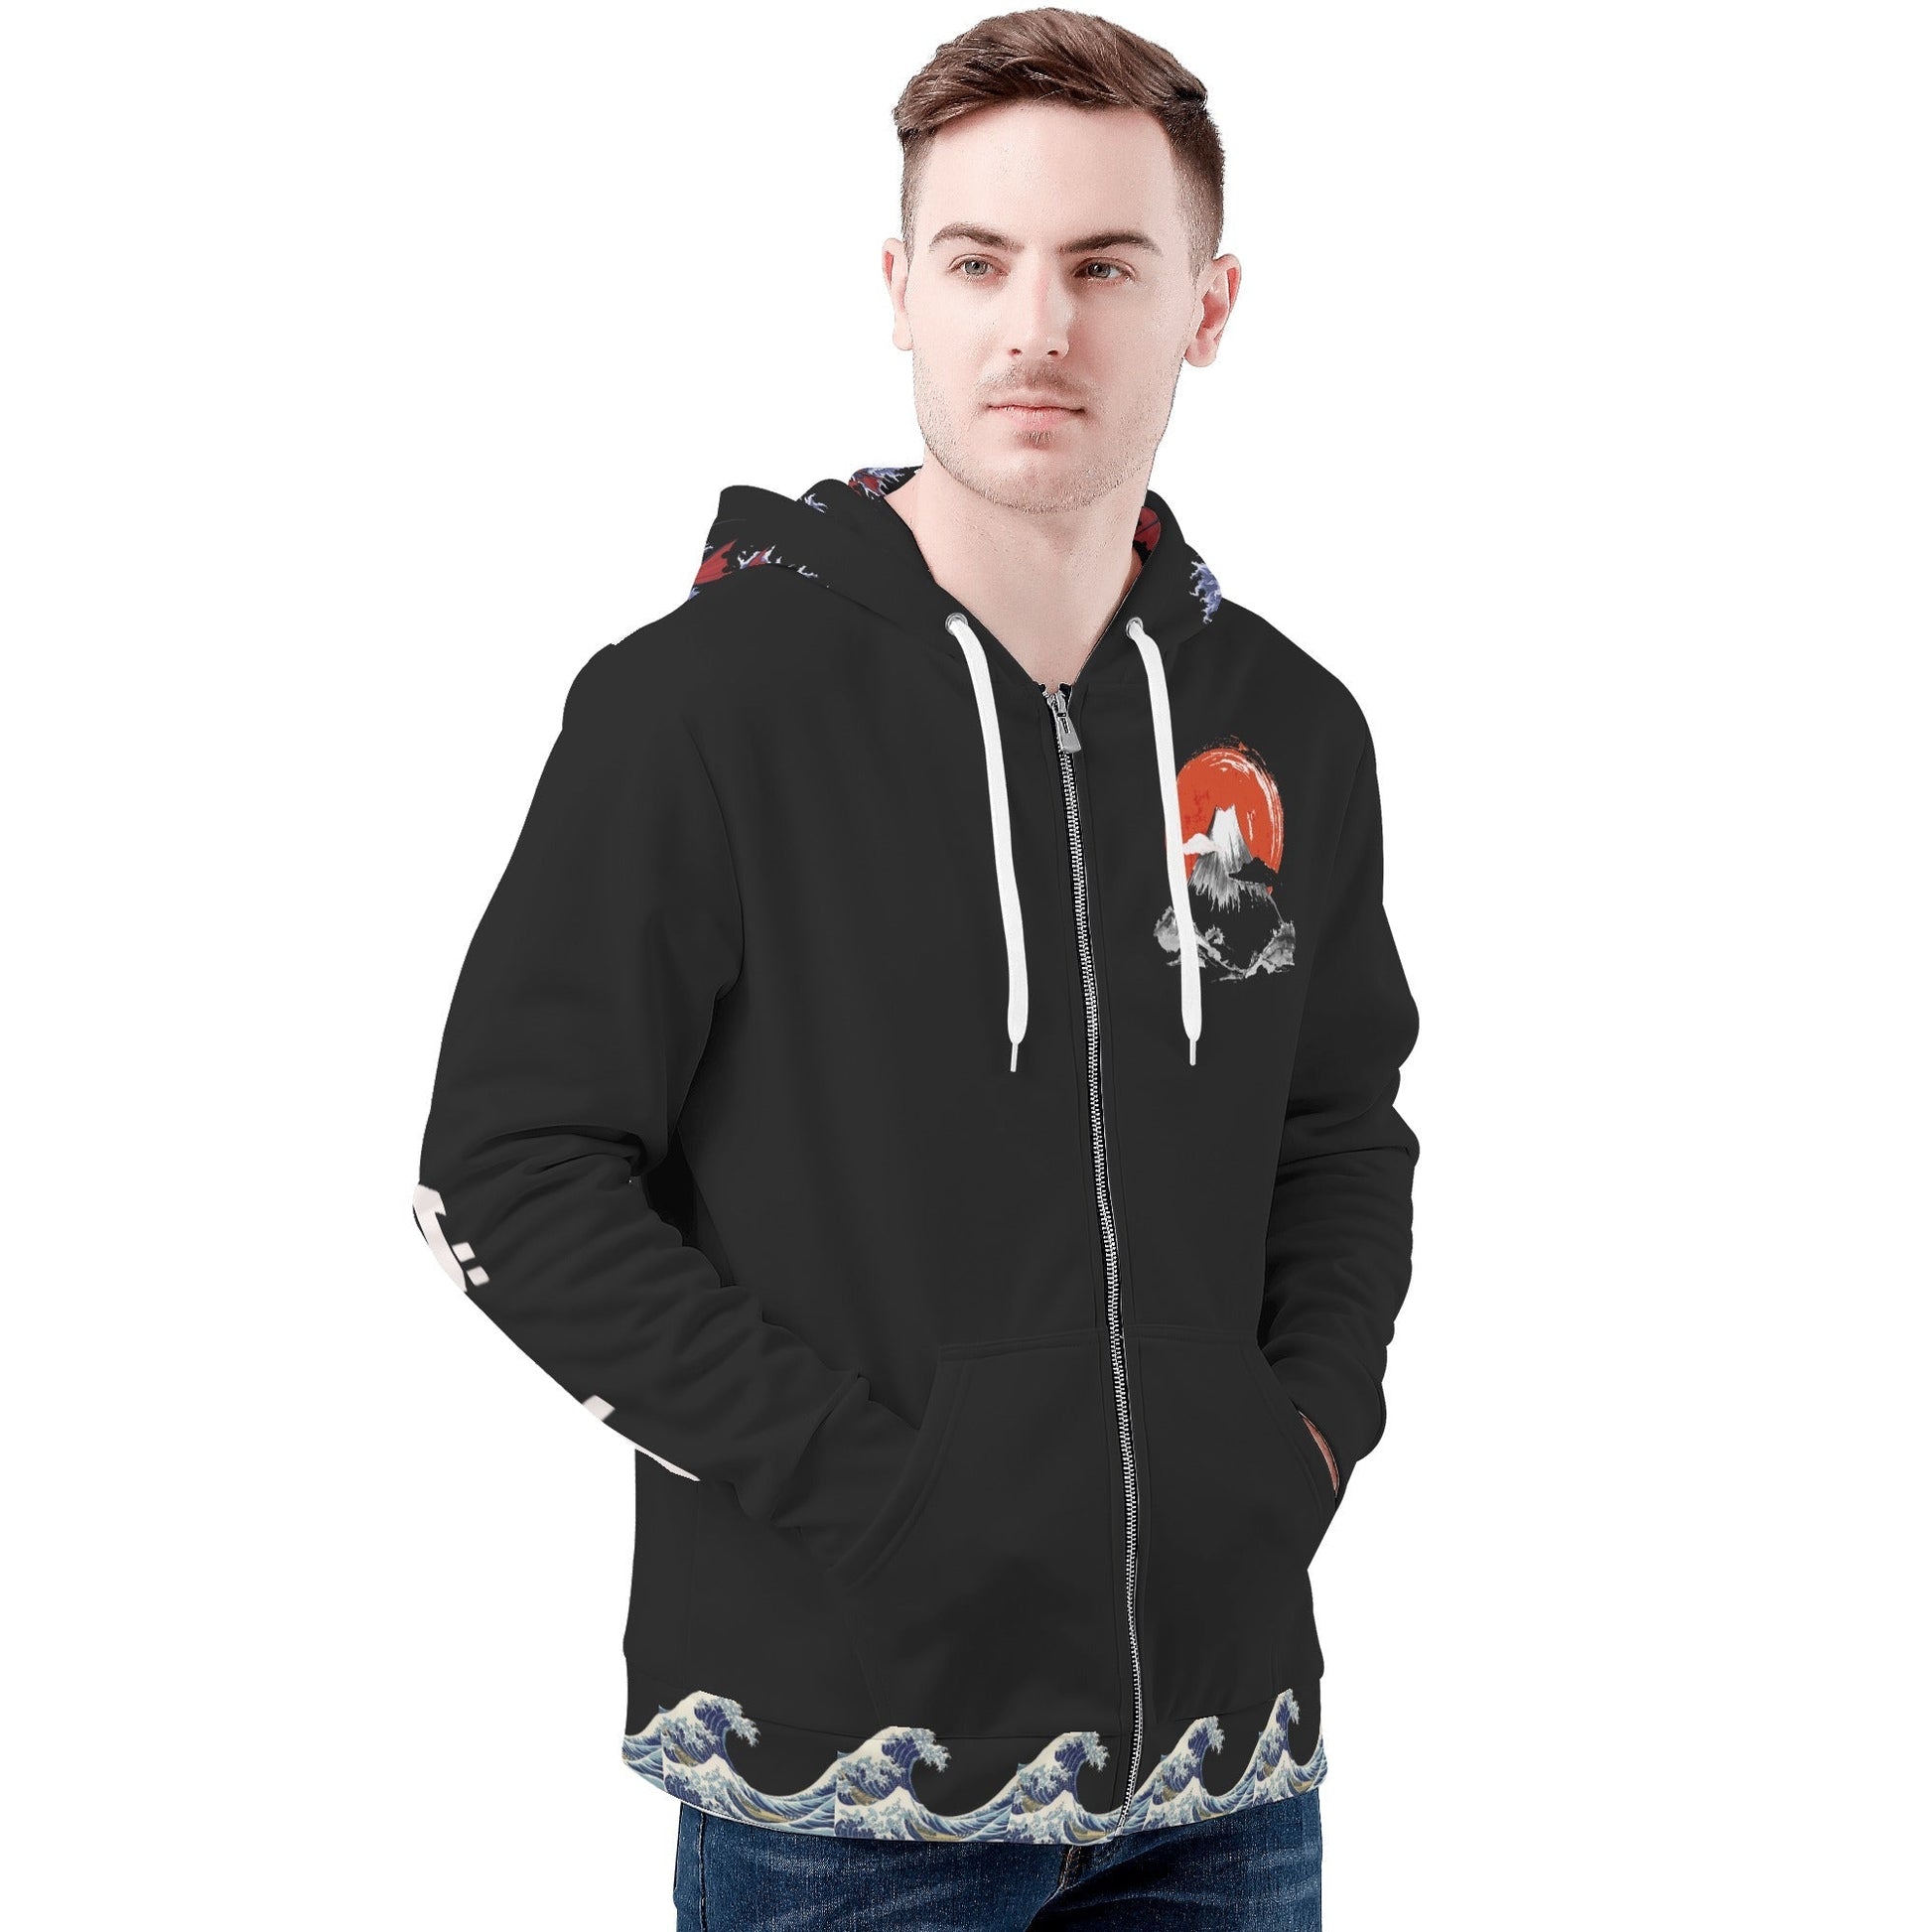 Stand out  with the  Tokyo Nugget Mens Zip Hoodie  available at Hey Nugget. Grab yours today!